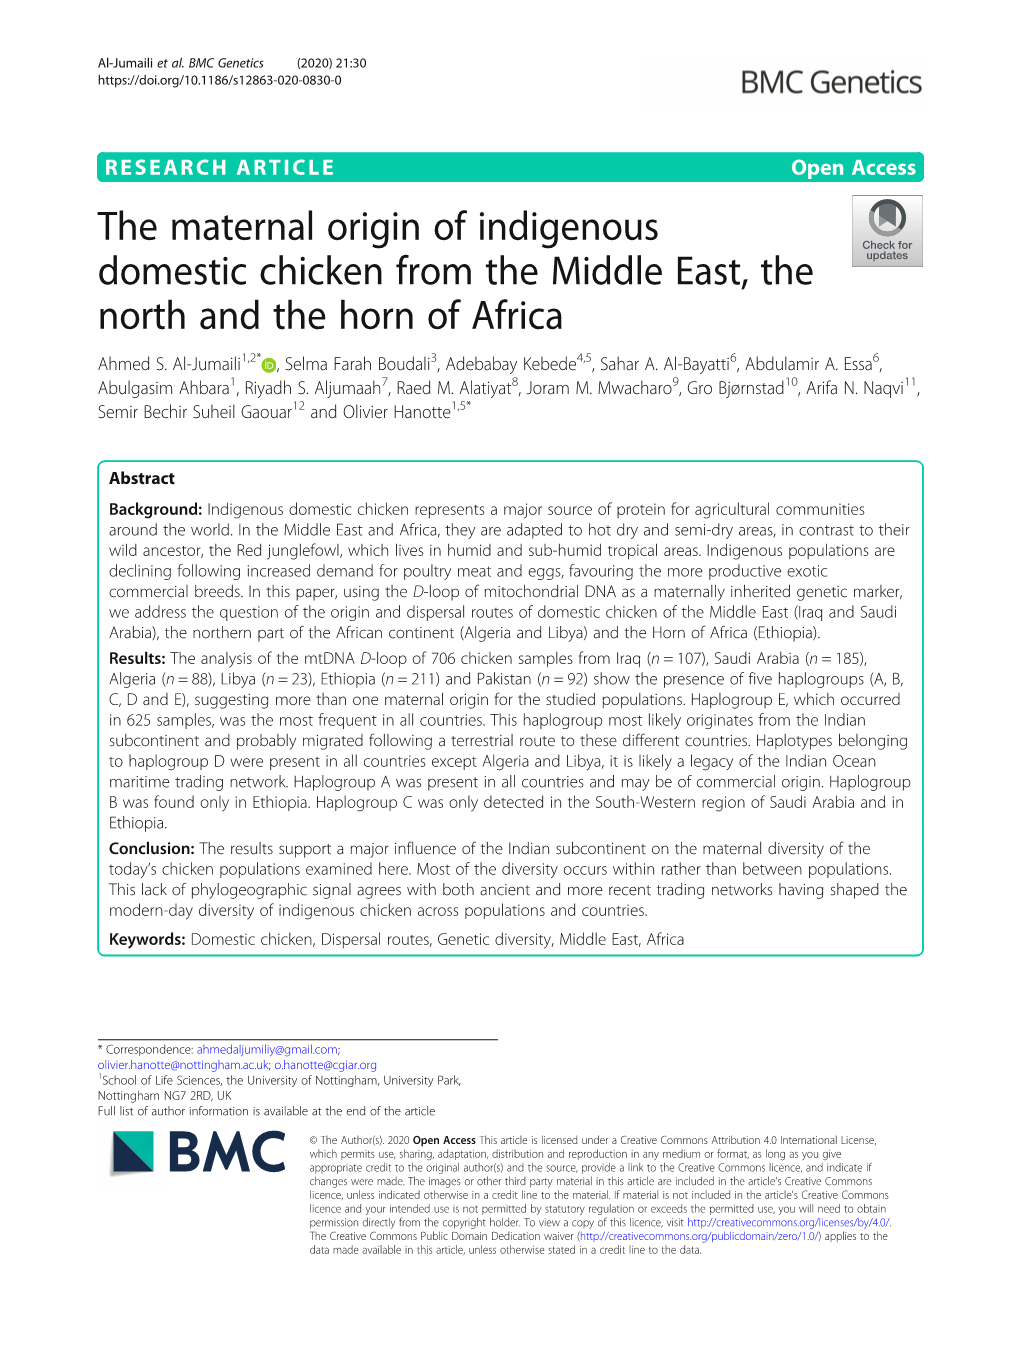 The Maternal Origin of Indigenous Domestic Chicken from the Middle East, the North and the Horn of Africa Ahmed S